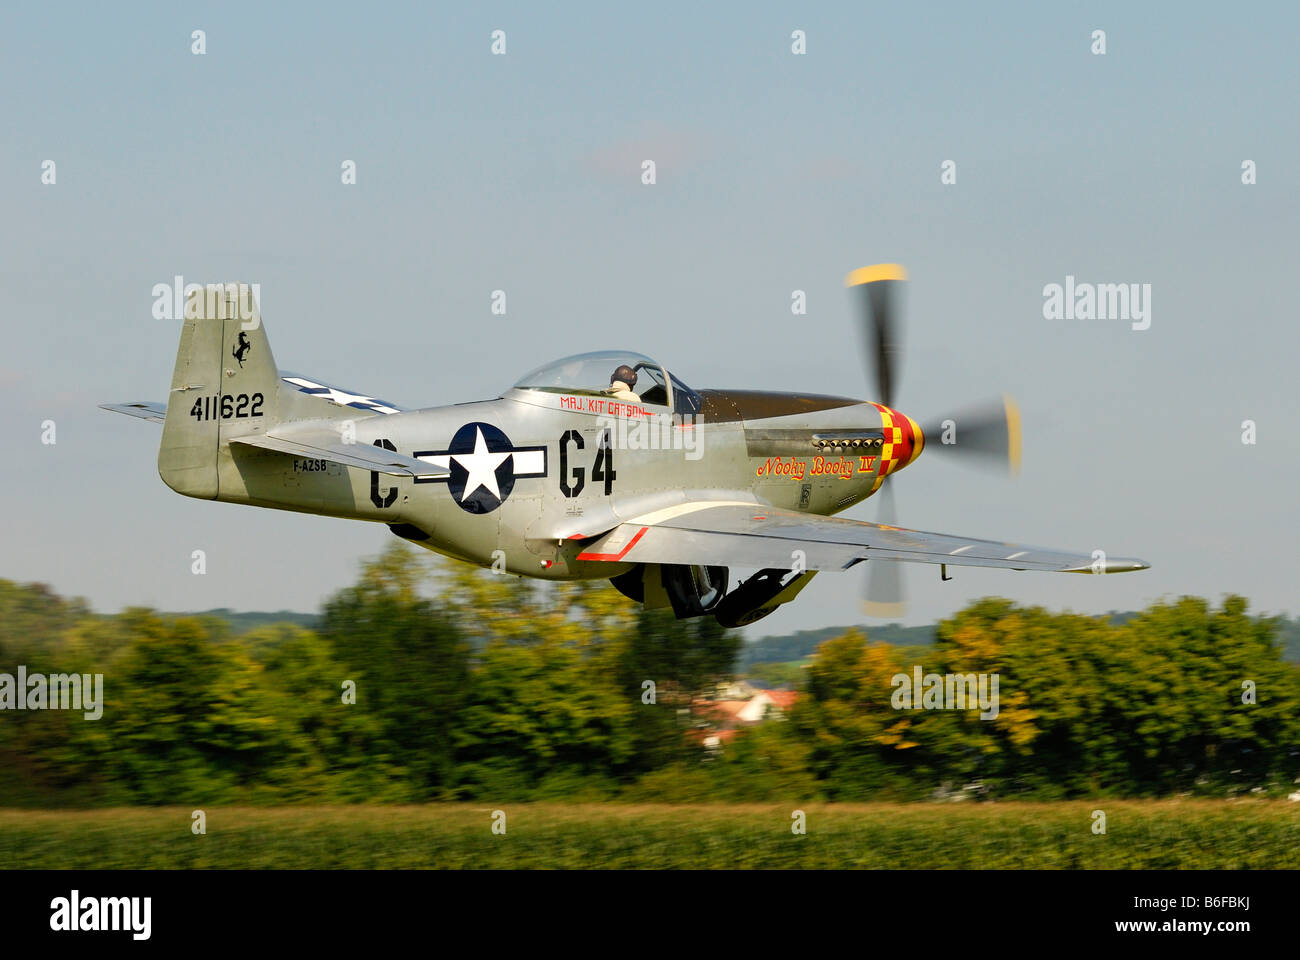 Legendary American fighter aircraft, North American P-51 Mustang, shortly after take-off Stock Photo